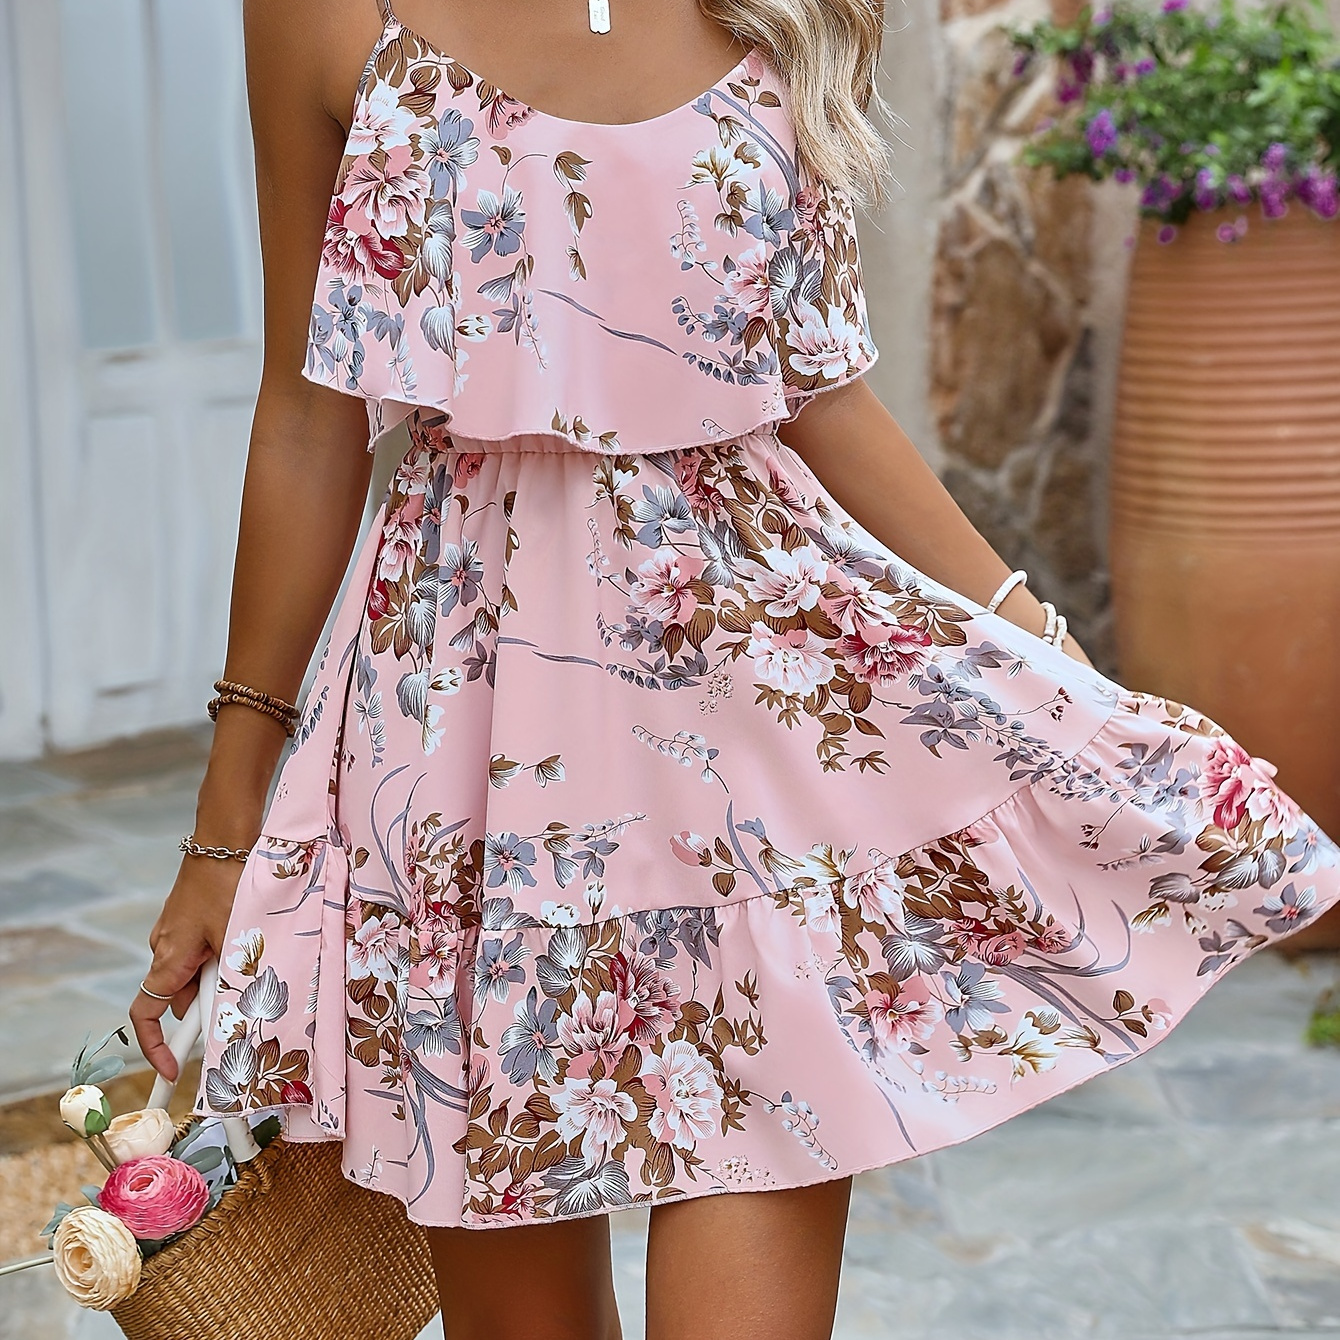 

Floral Print Spaghetti Strap Dress, Vacation Style Sleeveless Flowy Dress For Spring & Summer, Women's Clothing